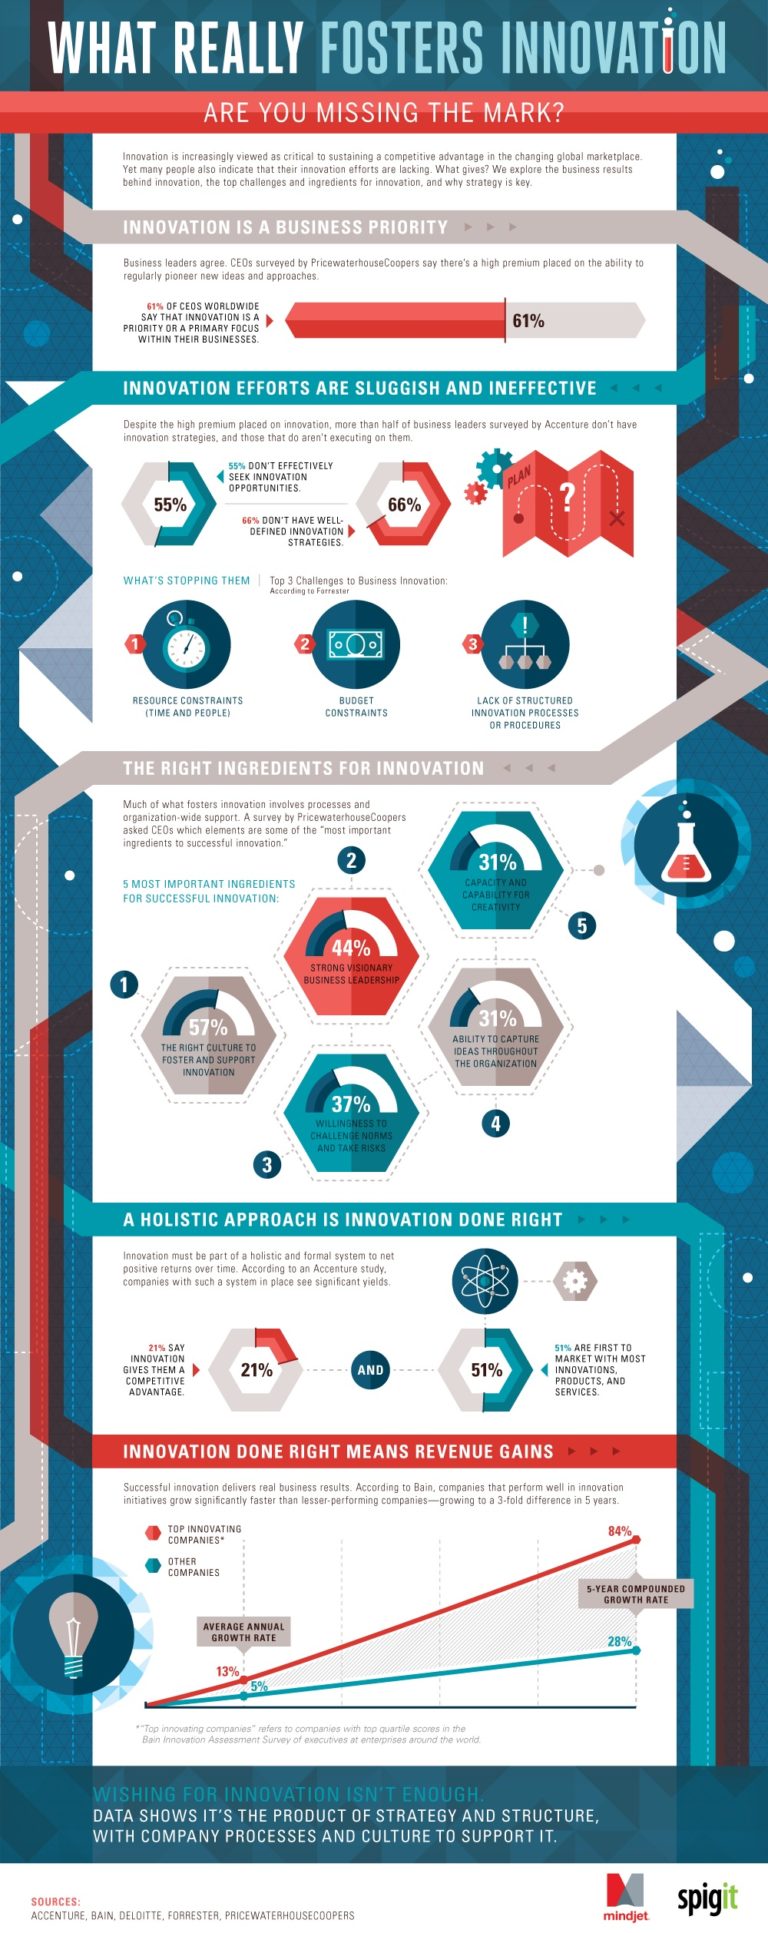 Making Innovation a Priority (Infographic)